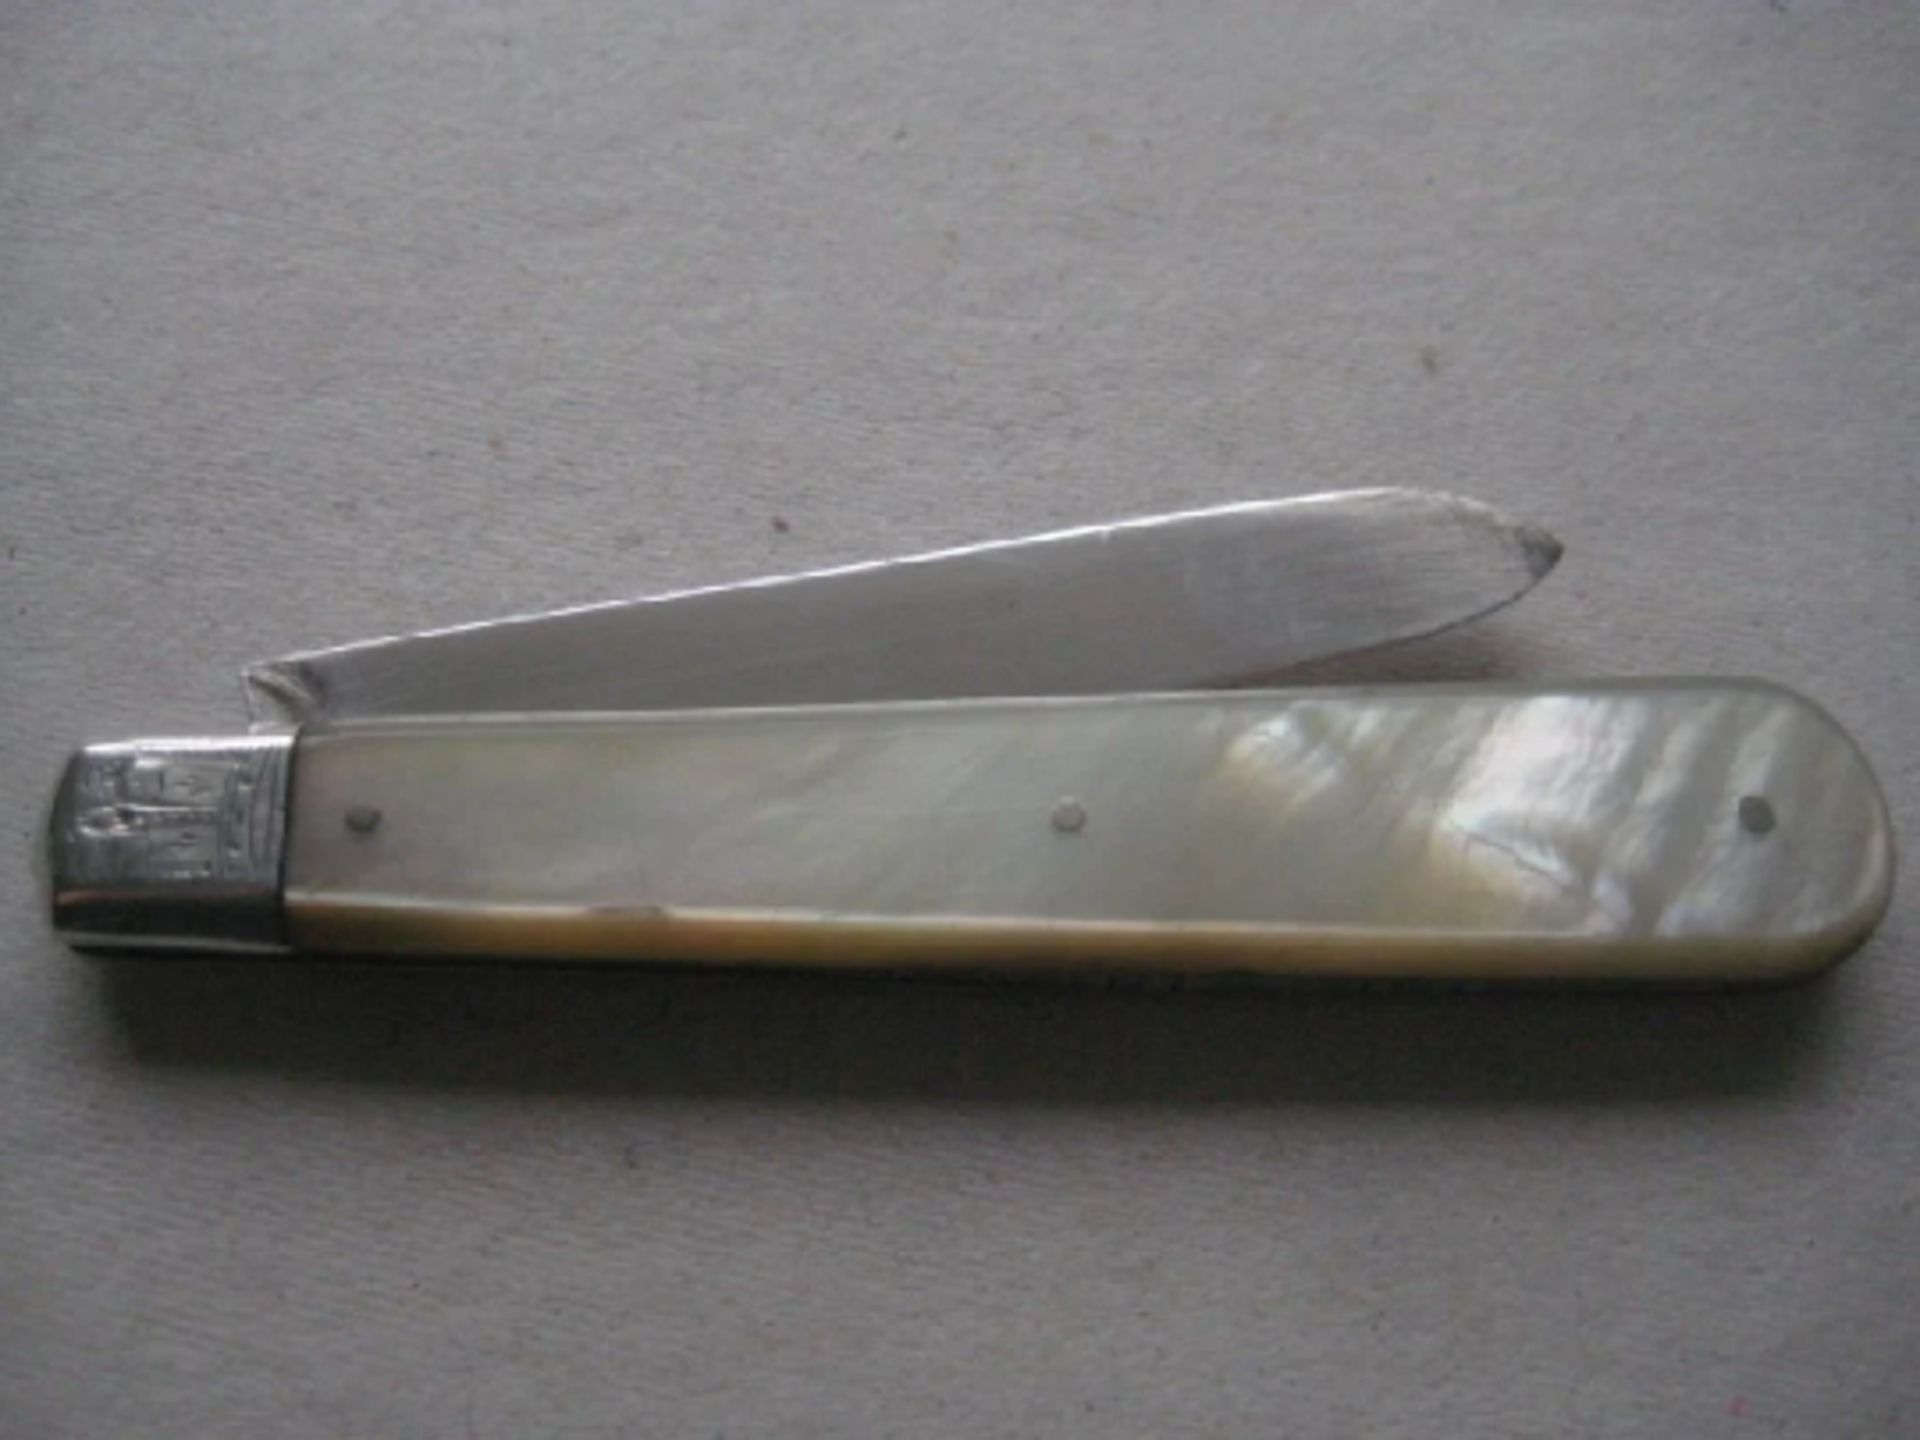 Rare London Hallmarked Edwardian Mother of Pearl Hafted Silver Bladed Folding Fruit Knife - Image 8 of 8